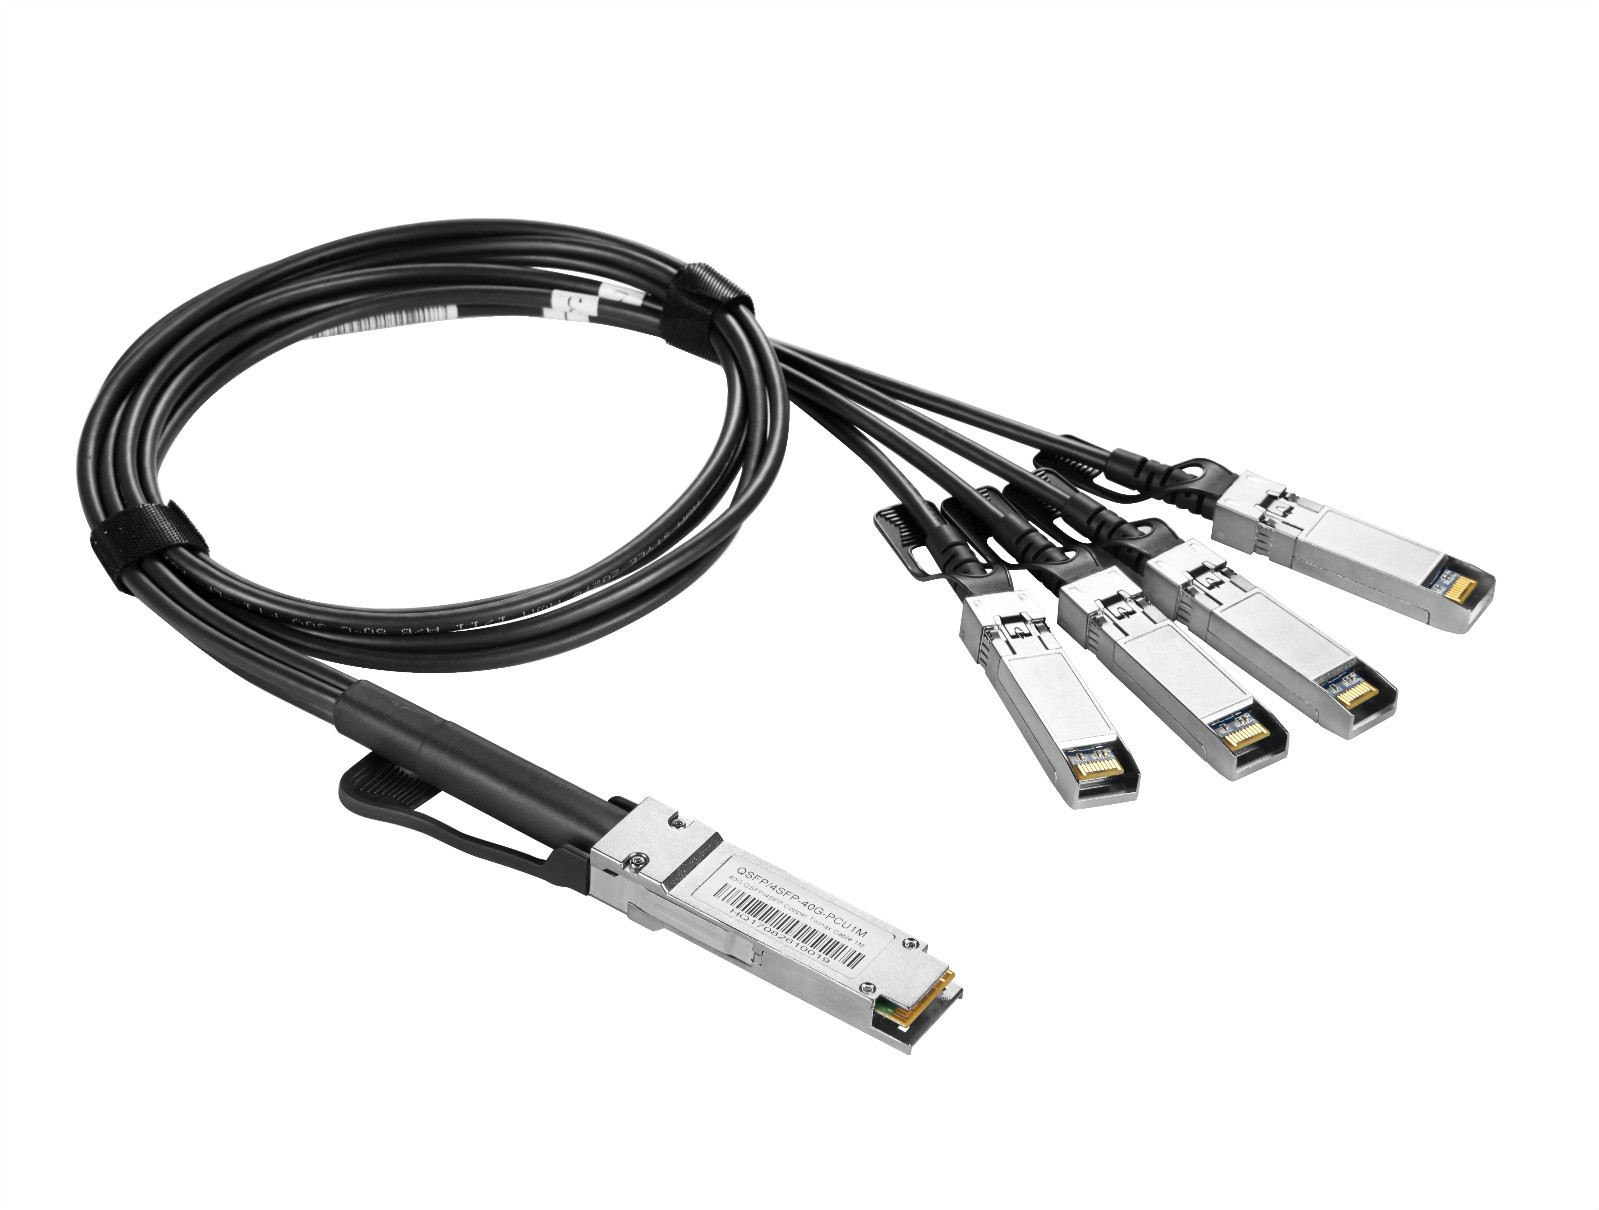 HTD-Infor100G QSFP28 DAC, a professional one-stop service o